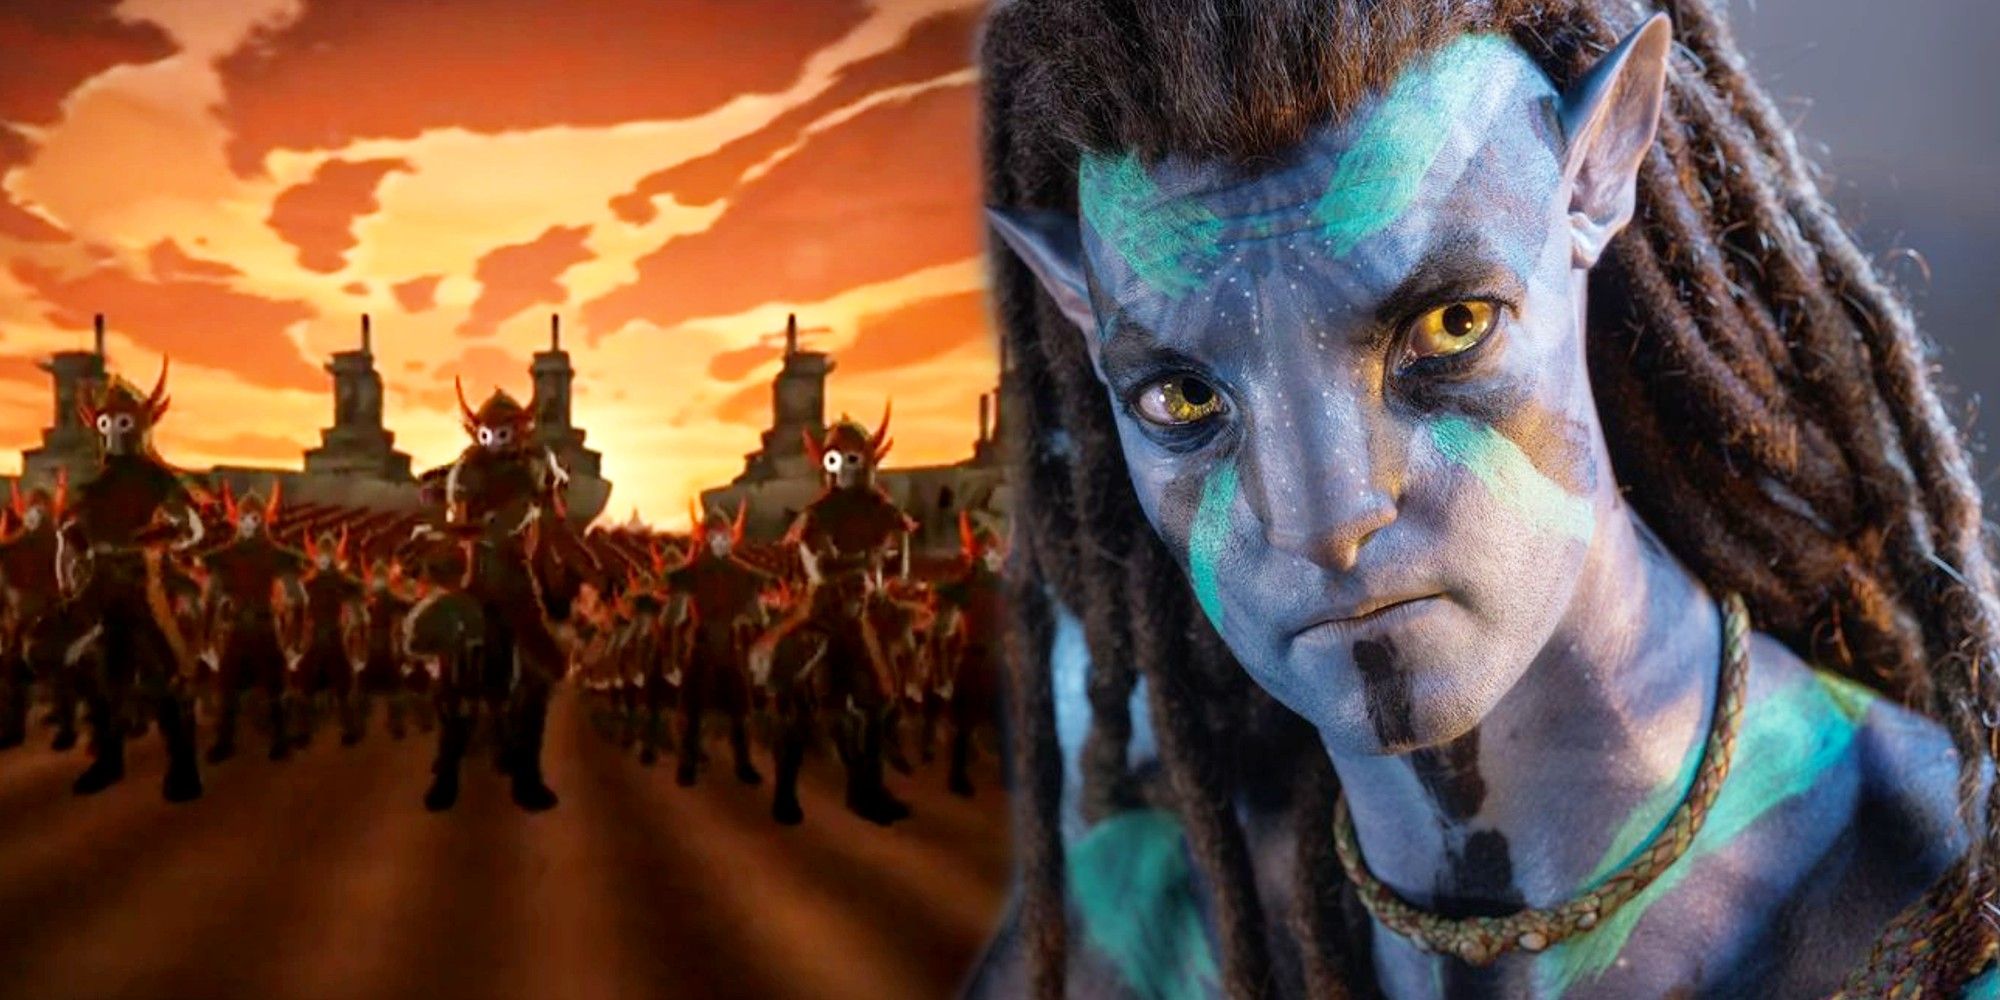 Avatar 2 The Way of Water Sam Worthington as Jake Sully Avatar 3 Avatar The Last Airbender Comparisons